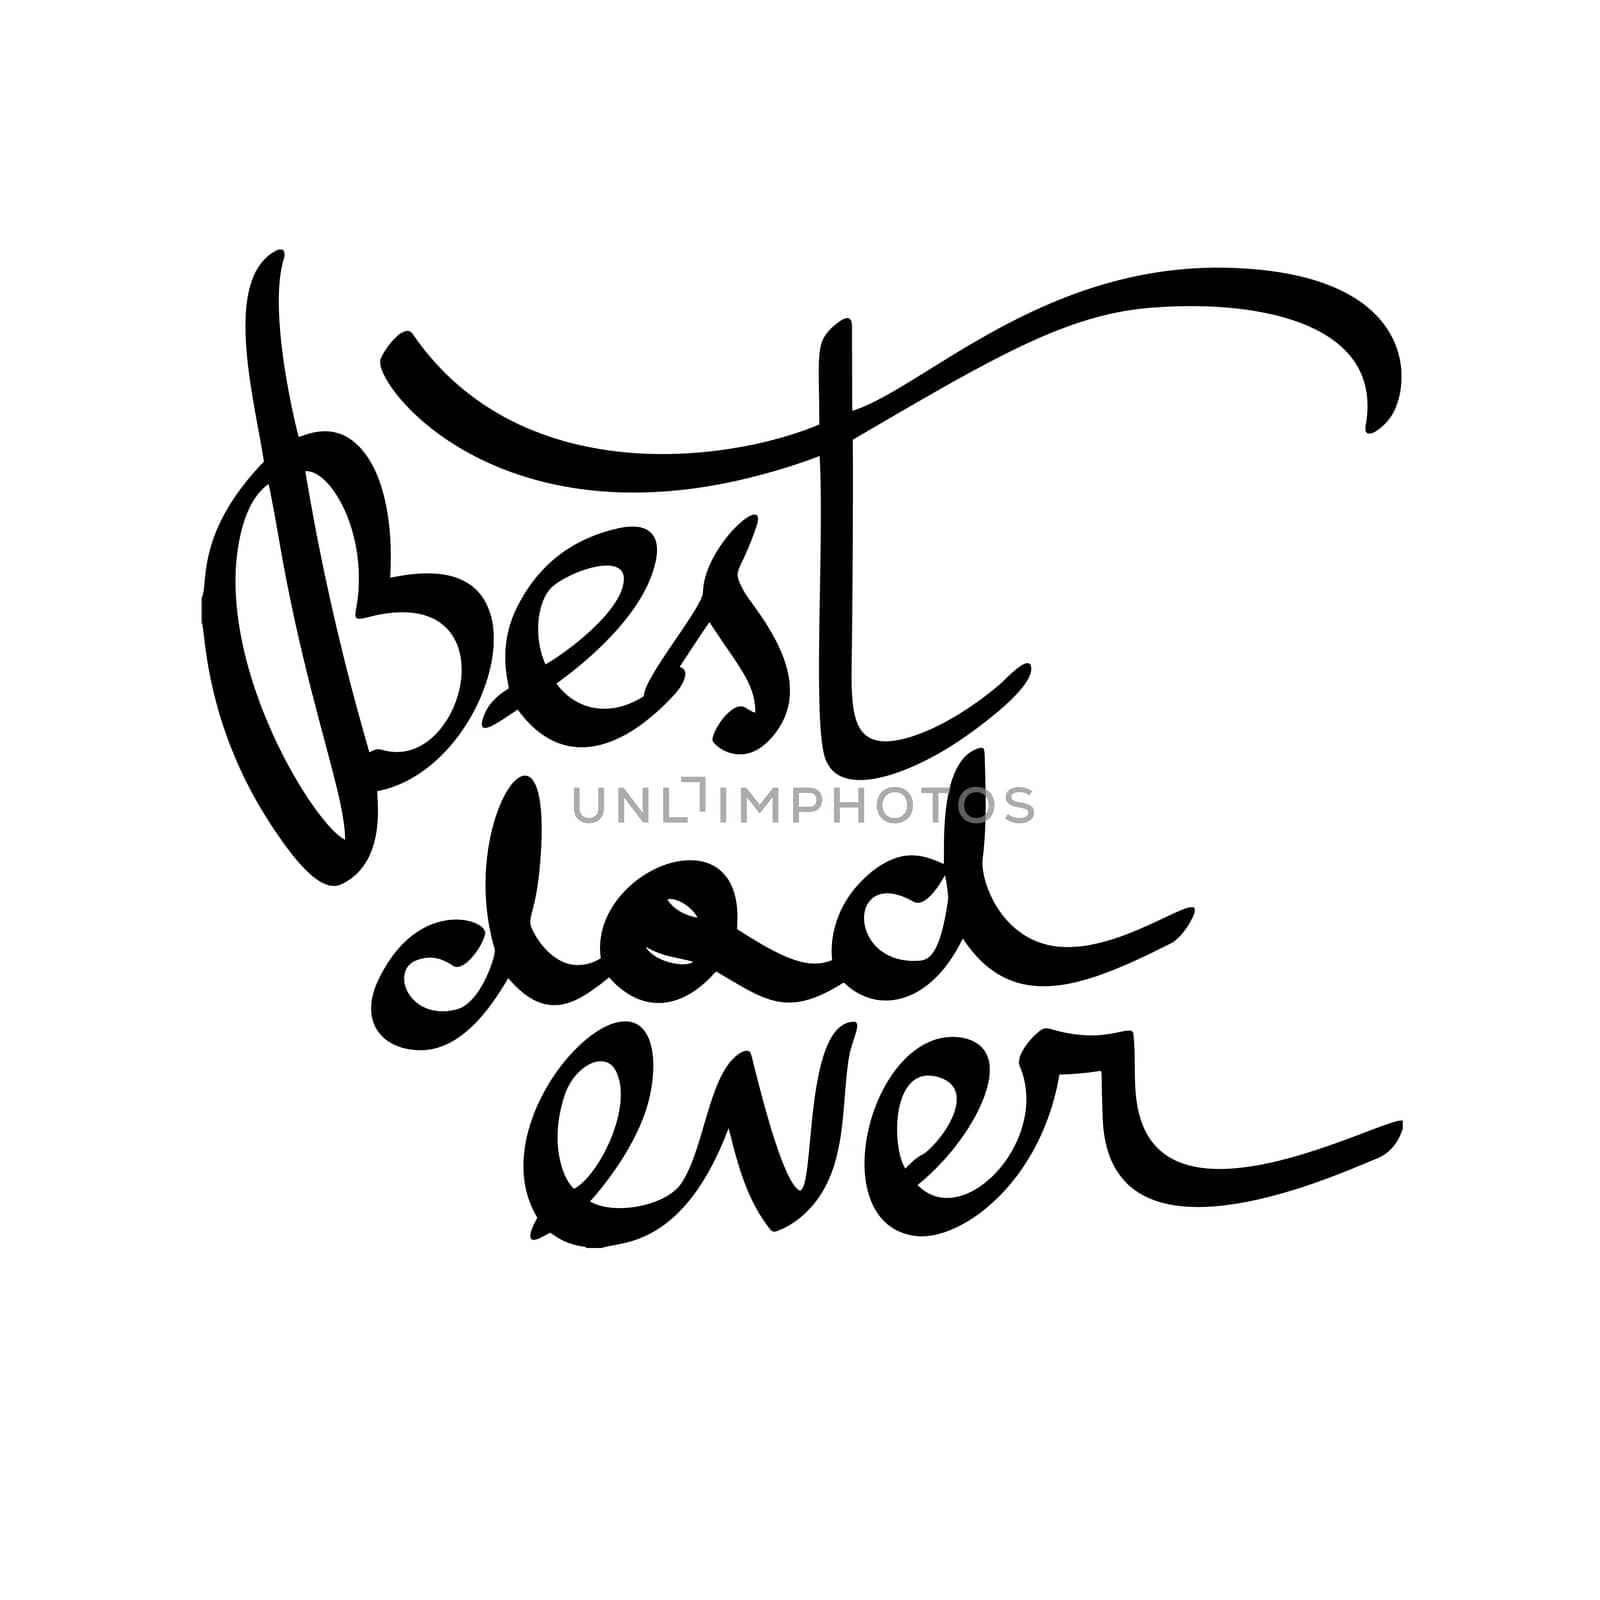 Best Dad Ever. hand-written lettering, t-shirt print design, typographic composition isolated on white background